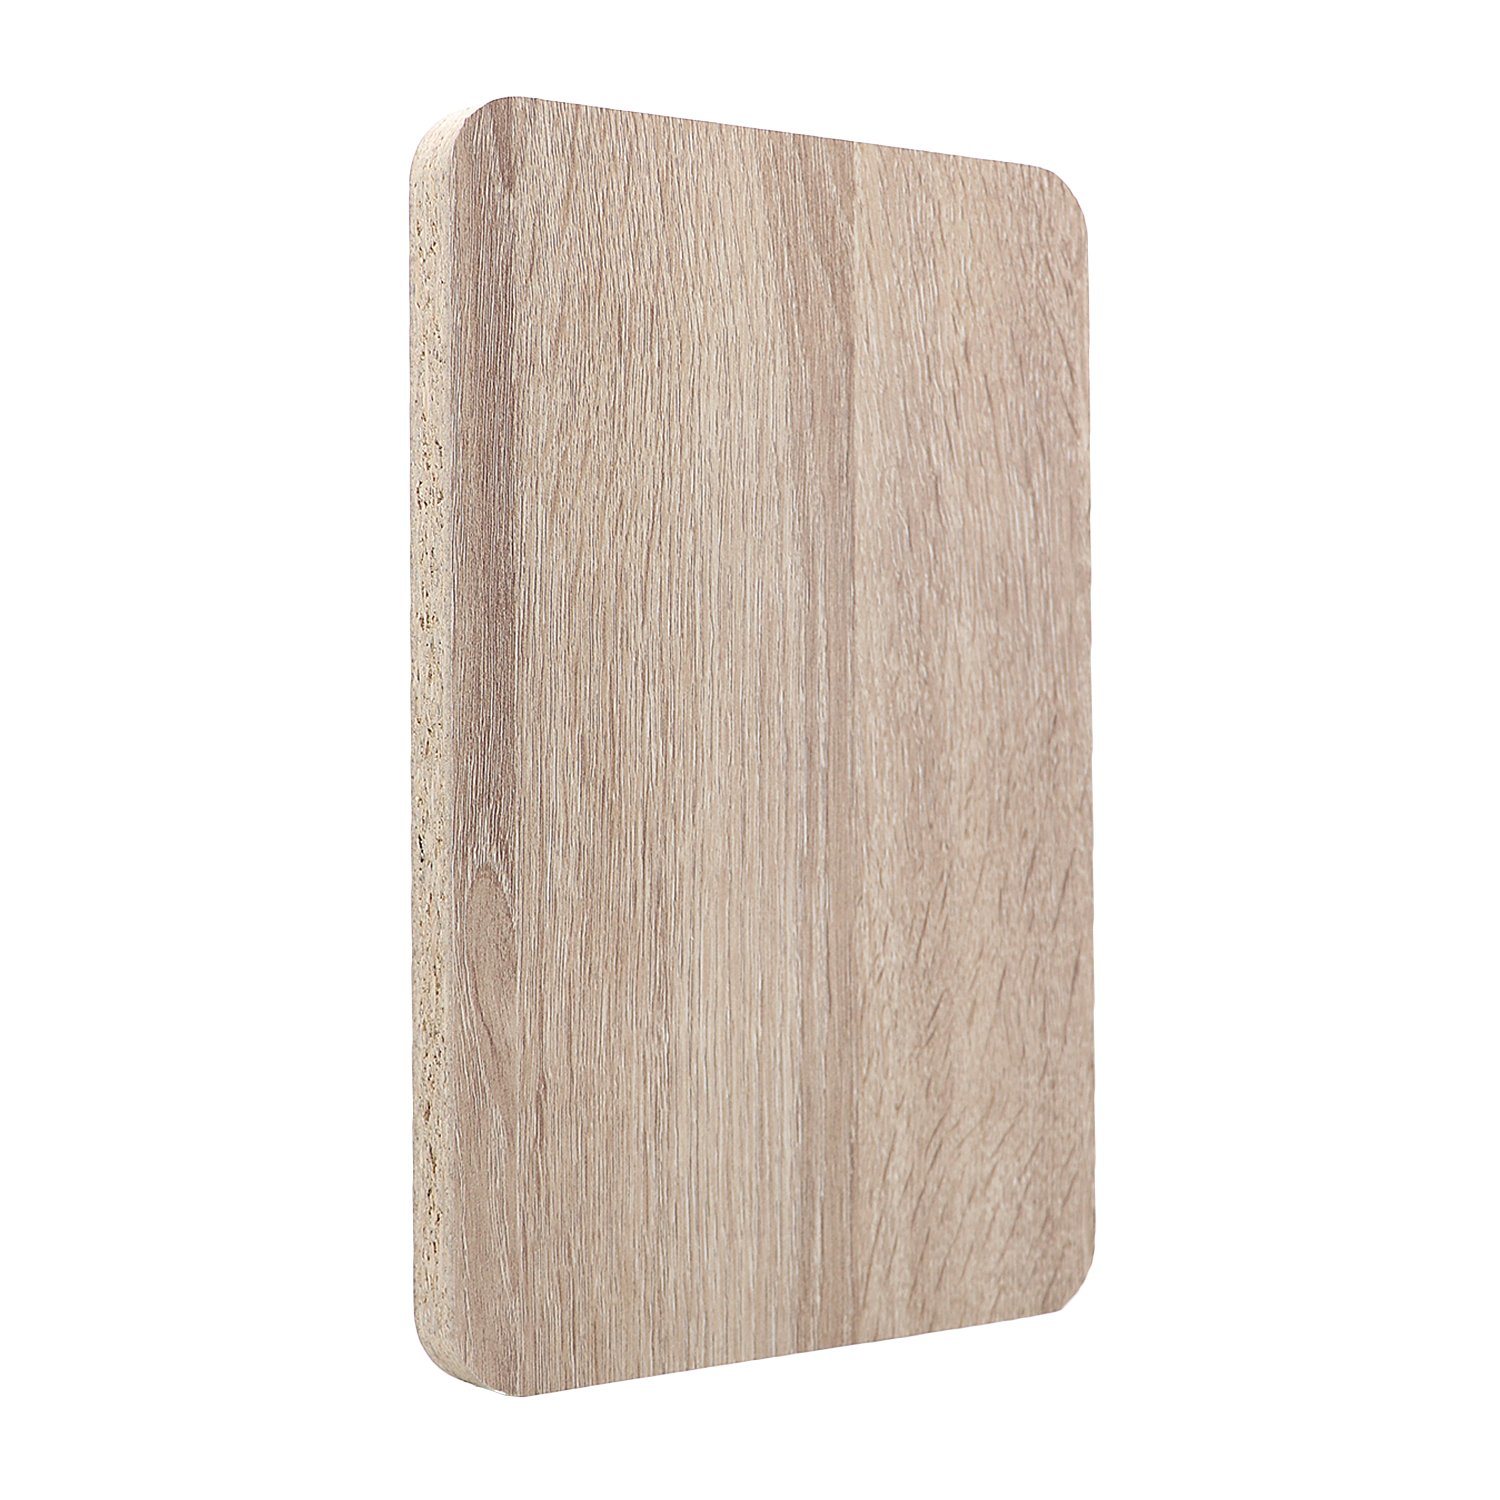 Cheap Price Melamine Faced Particleboard Wood Grain Coated Chipboard